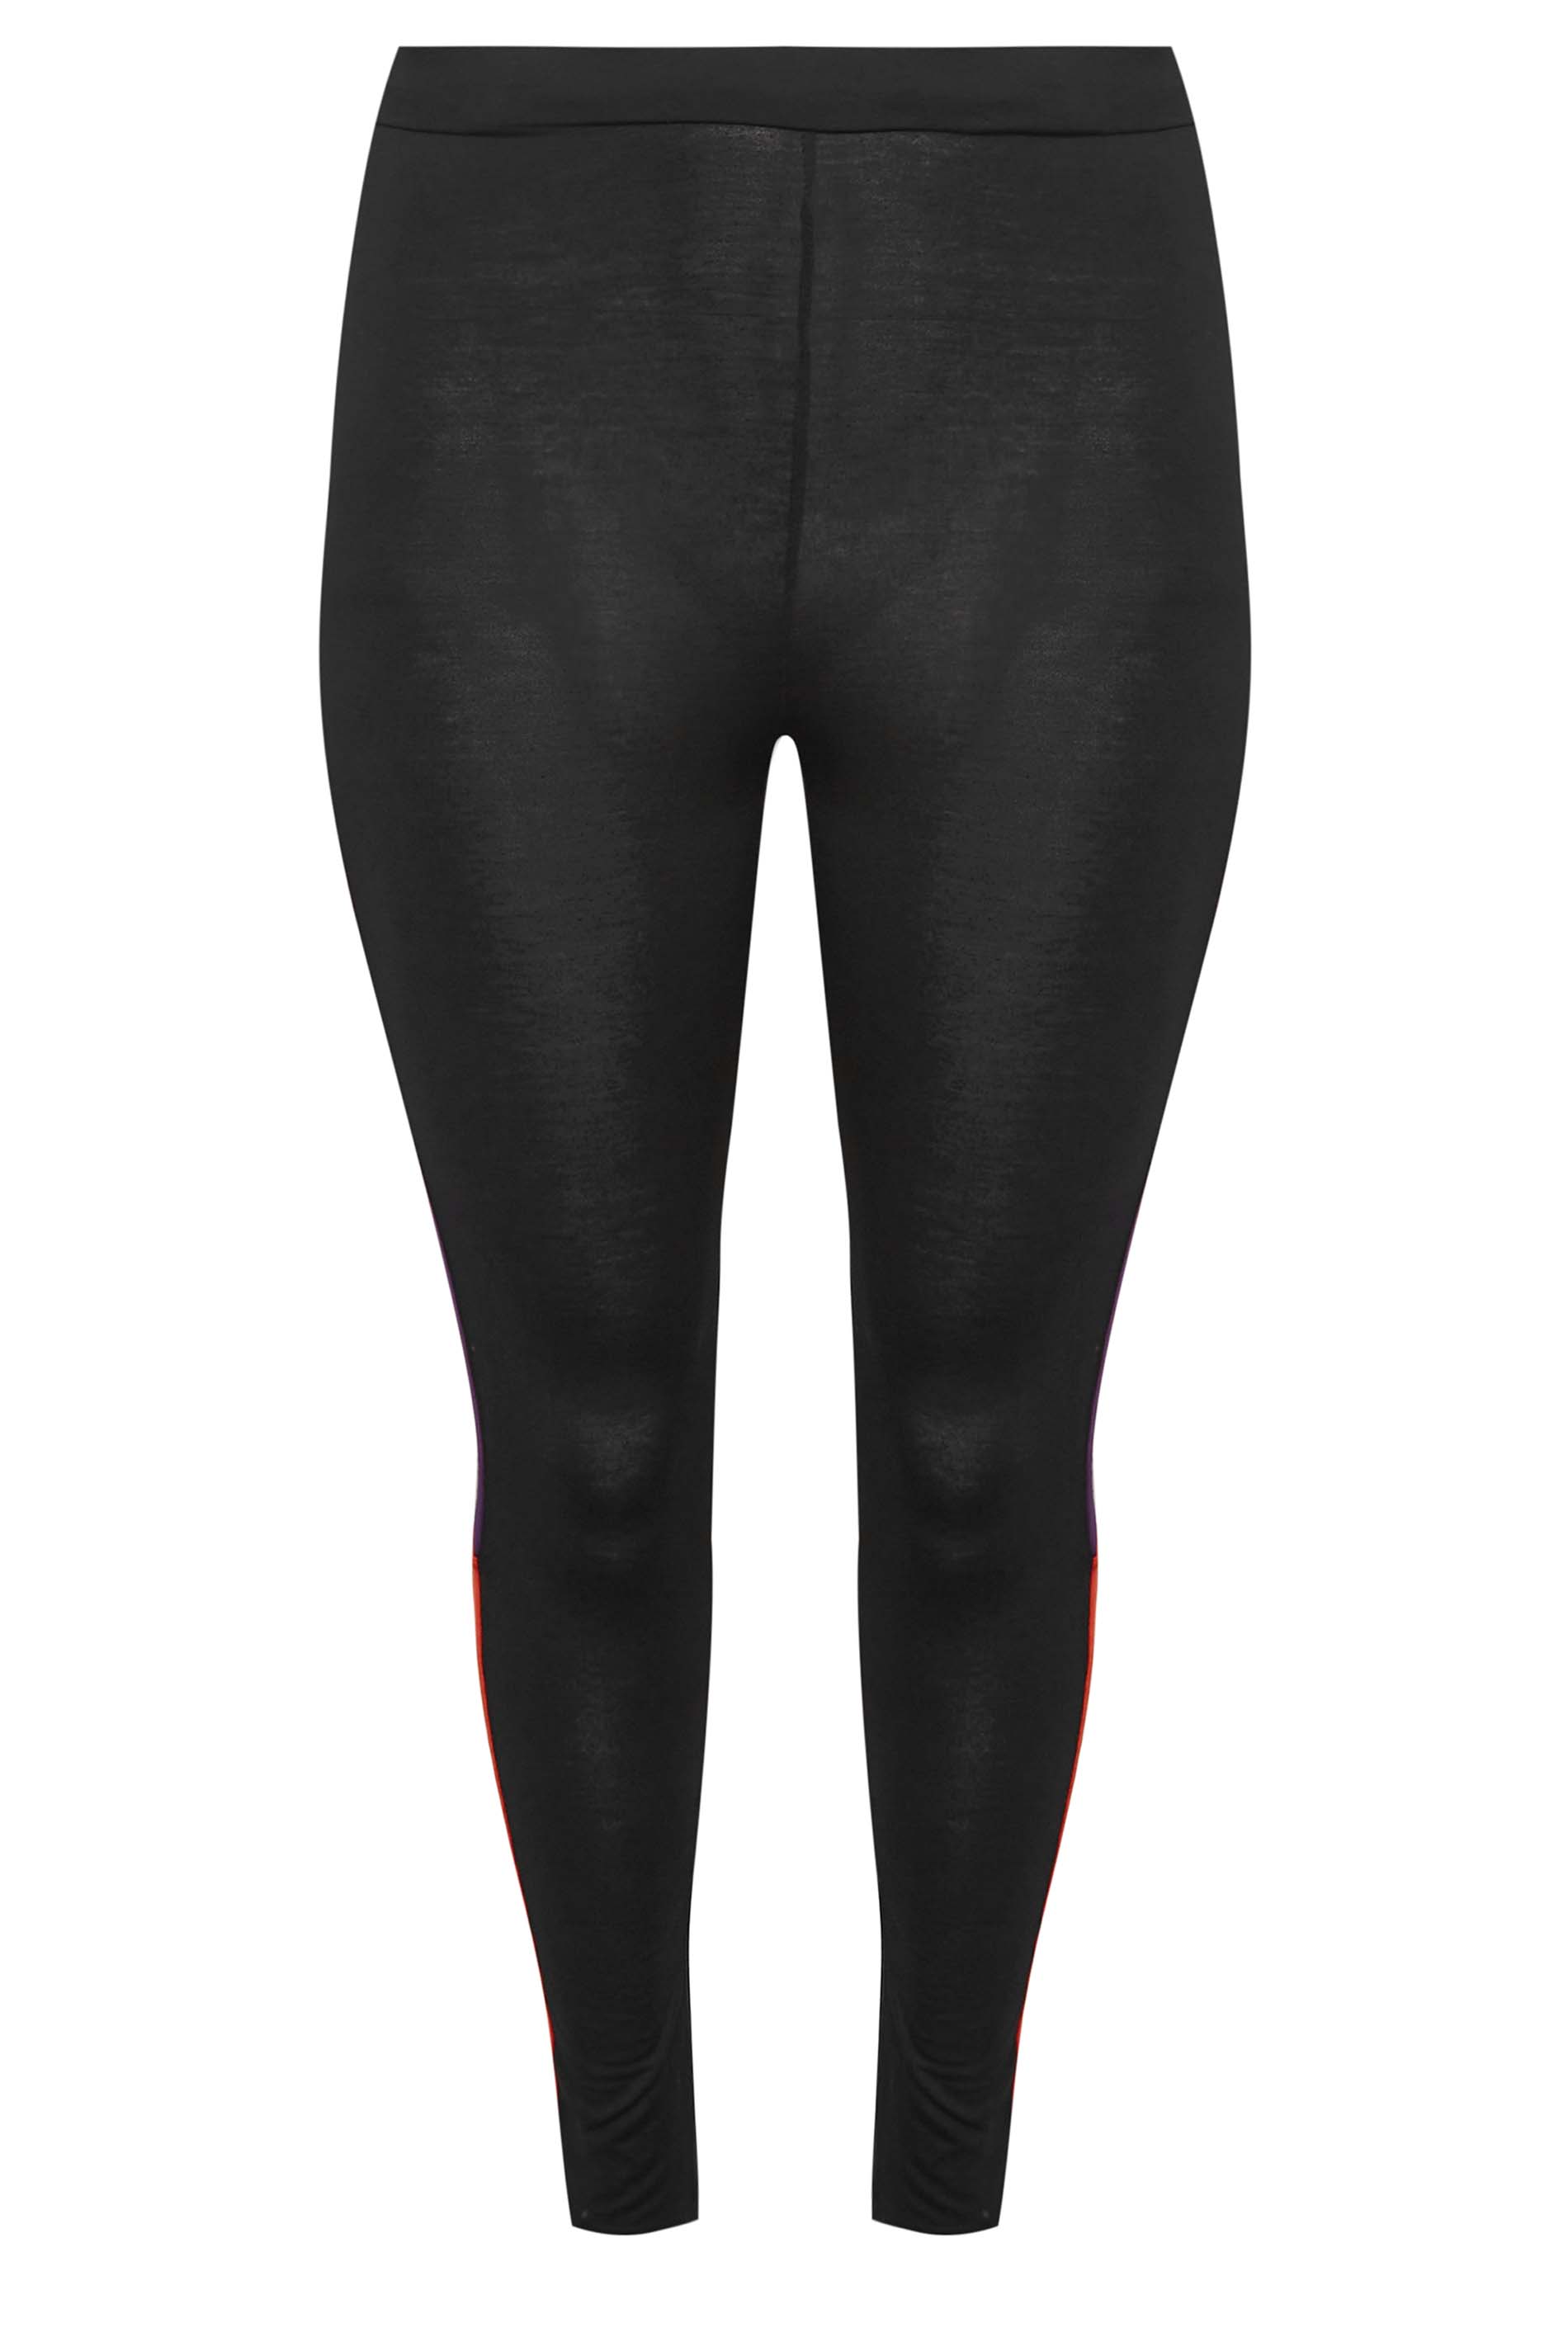 Under Armour Women's Cosy Blocked Tights (Black/White, Size XL)